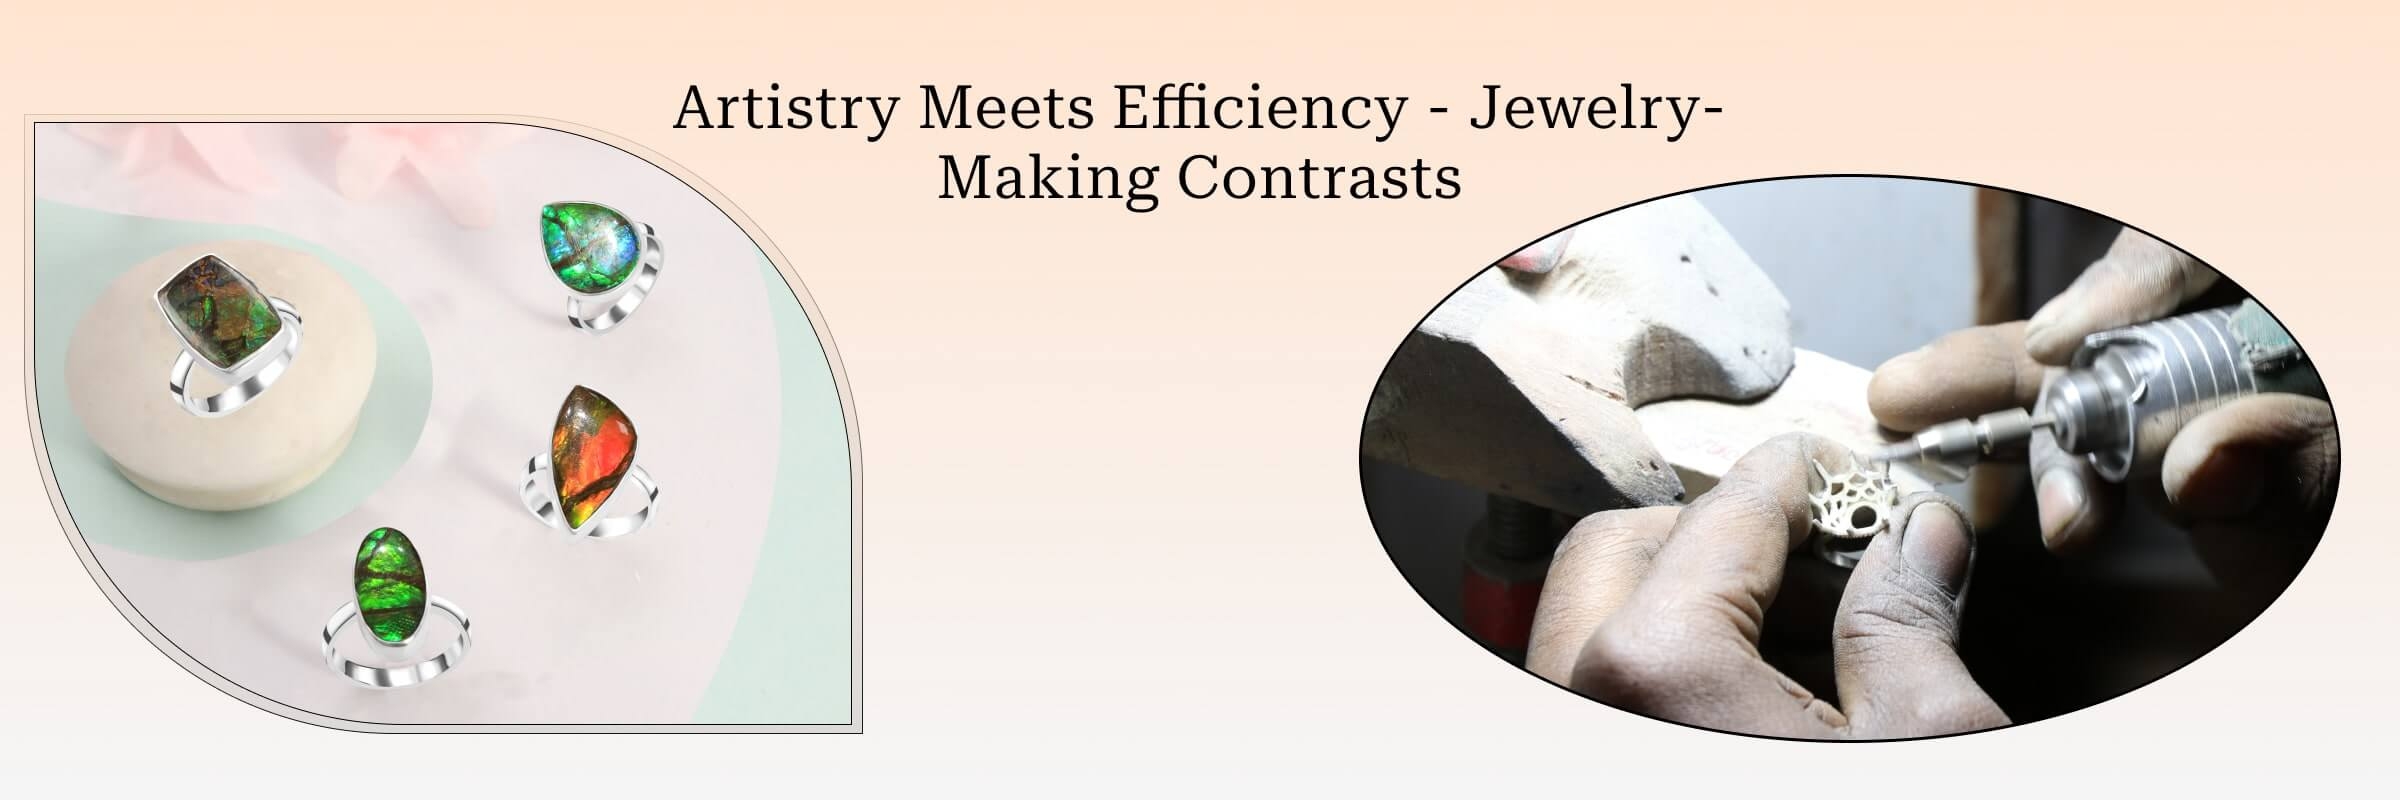 Difference between Handmade and Mass-made Jewelry